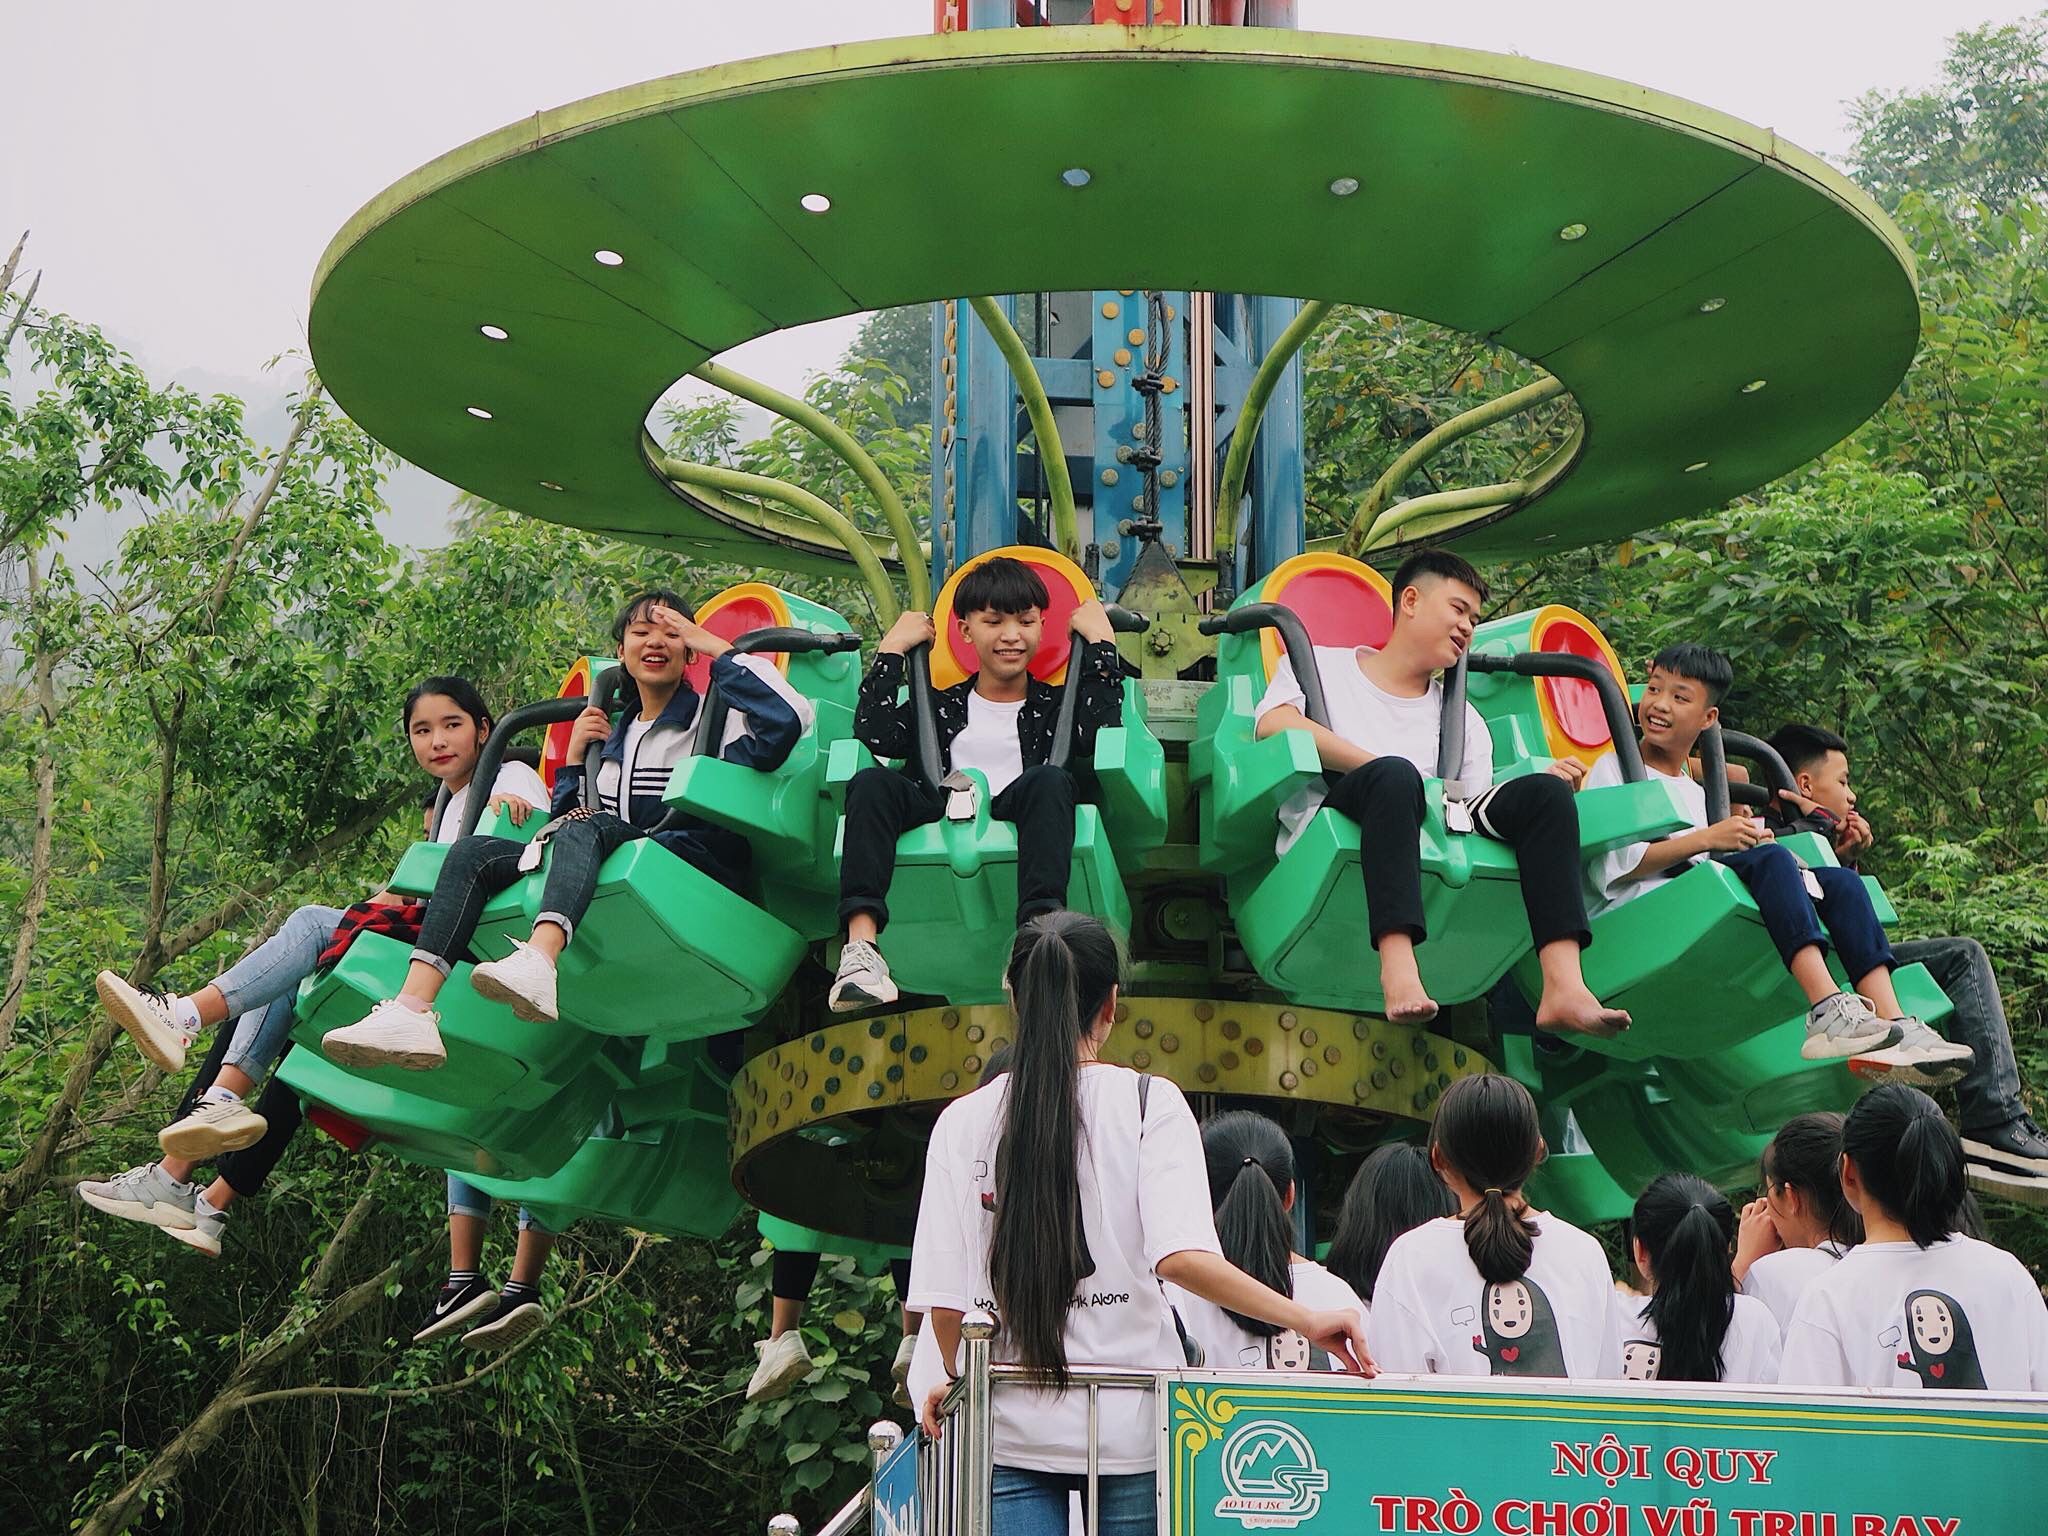 A group of people riding a roller coaster

Description automatically generated with medium confidence